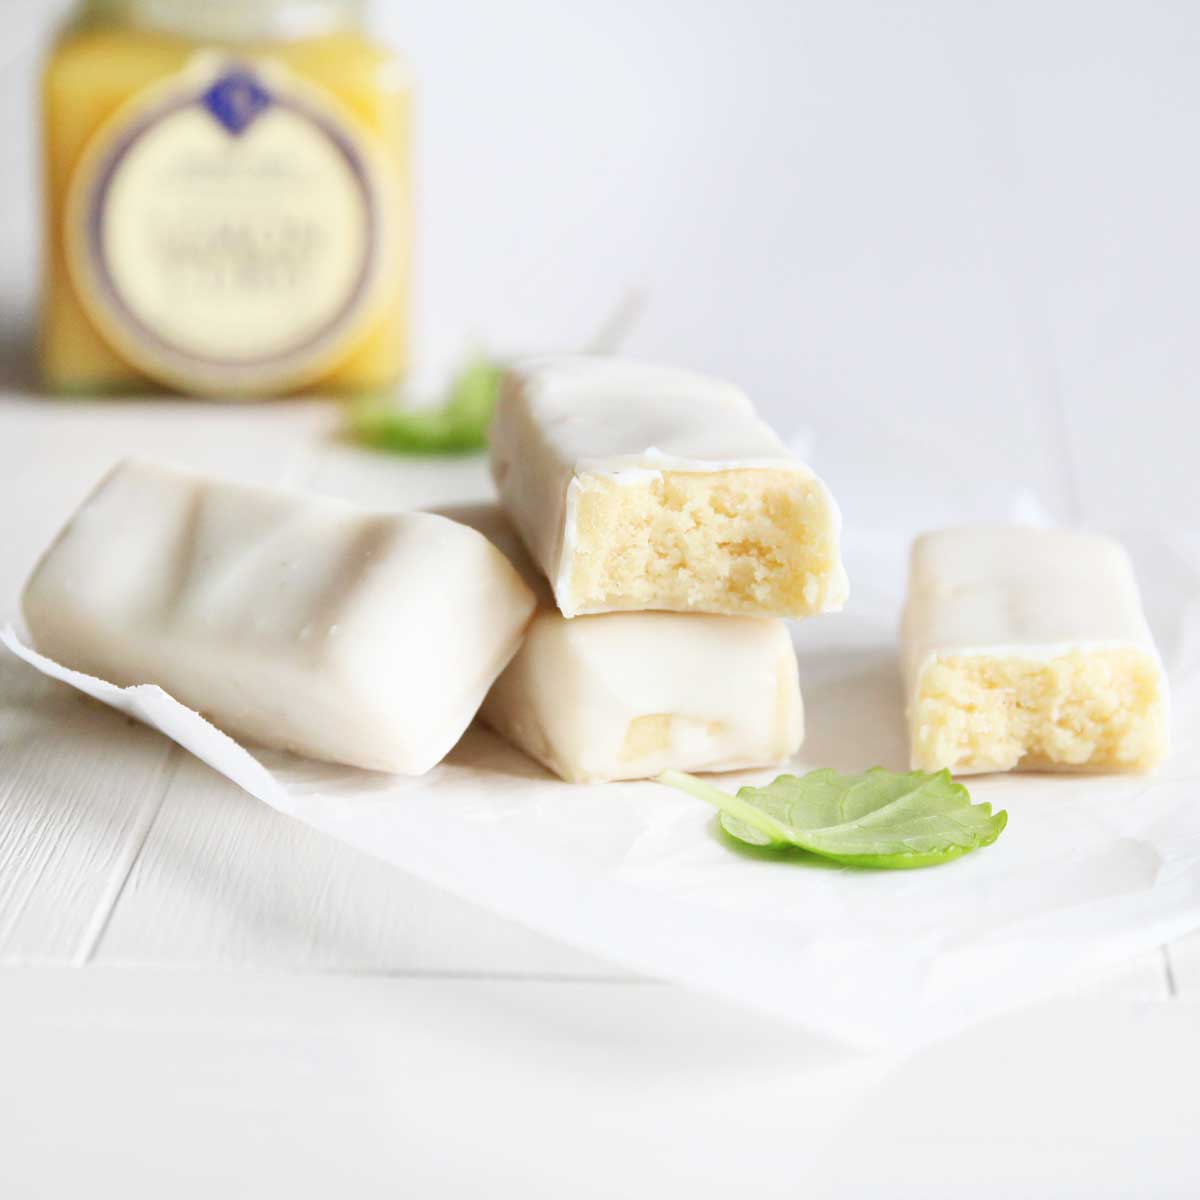 Healthy Homemade Lemon Protein Bars made with Collagen Peptides - Lemon Protein Bars